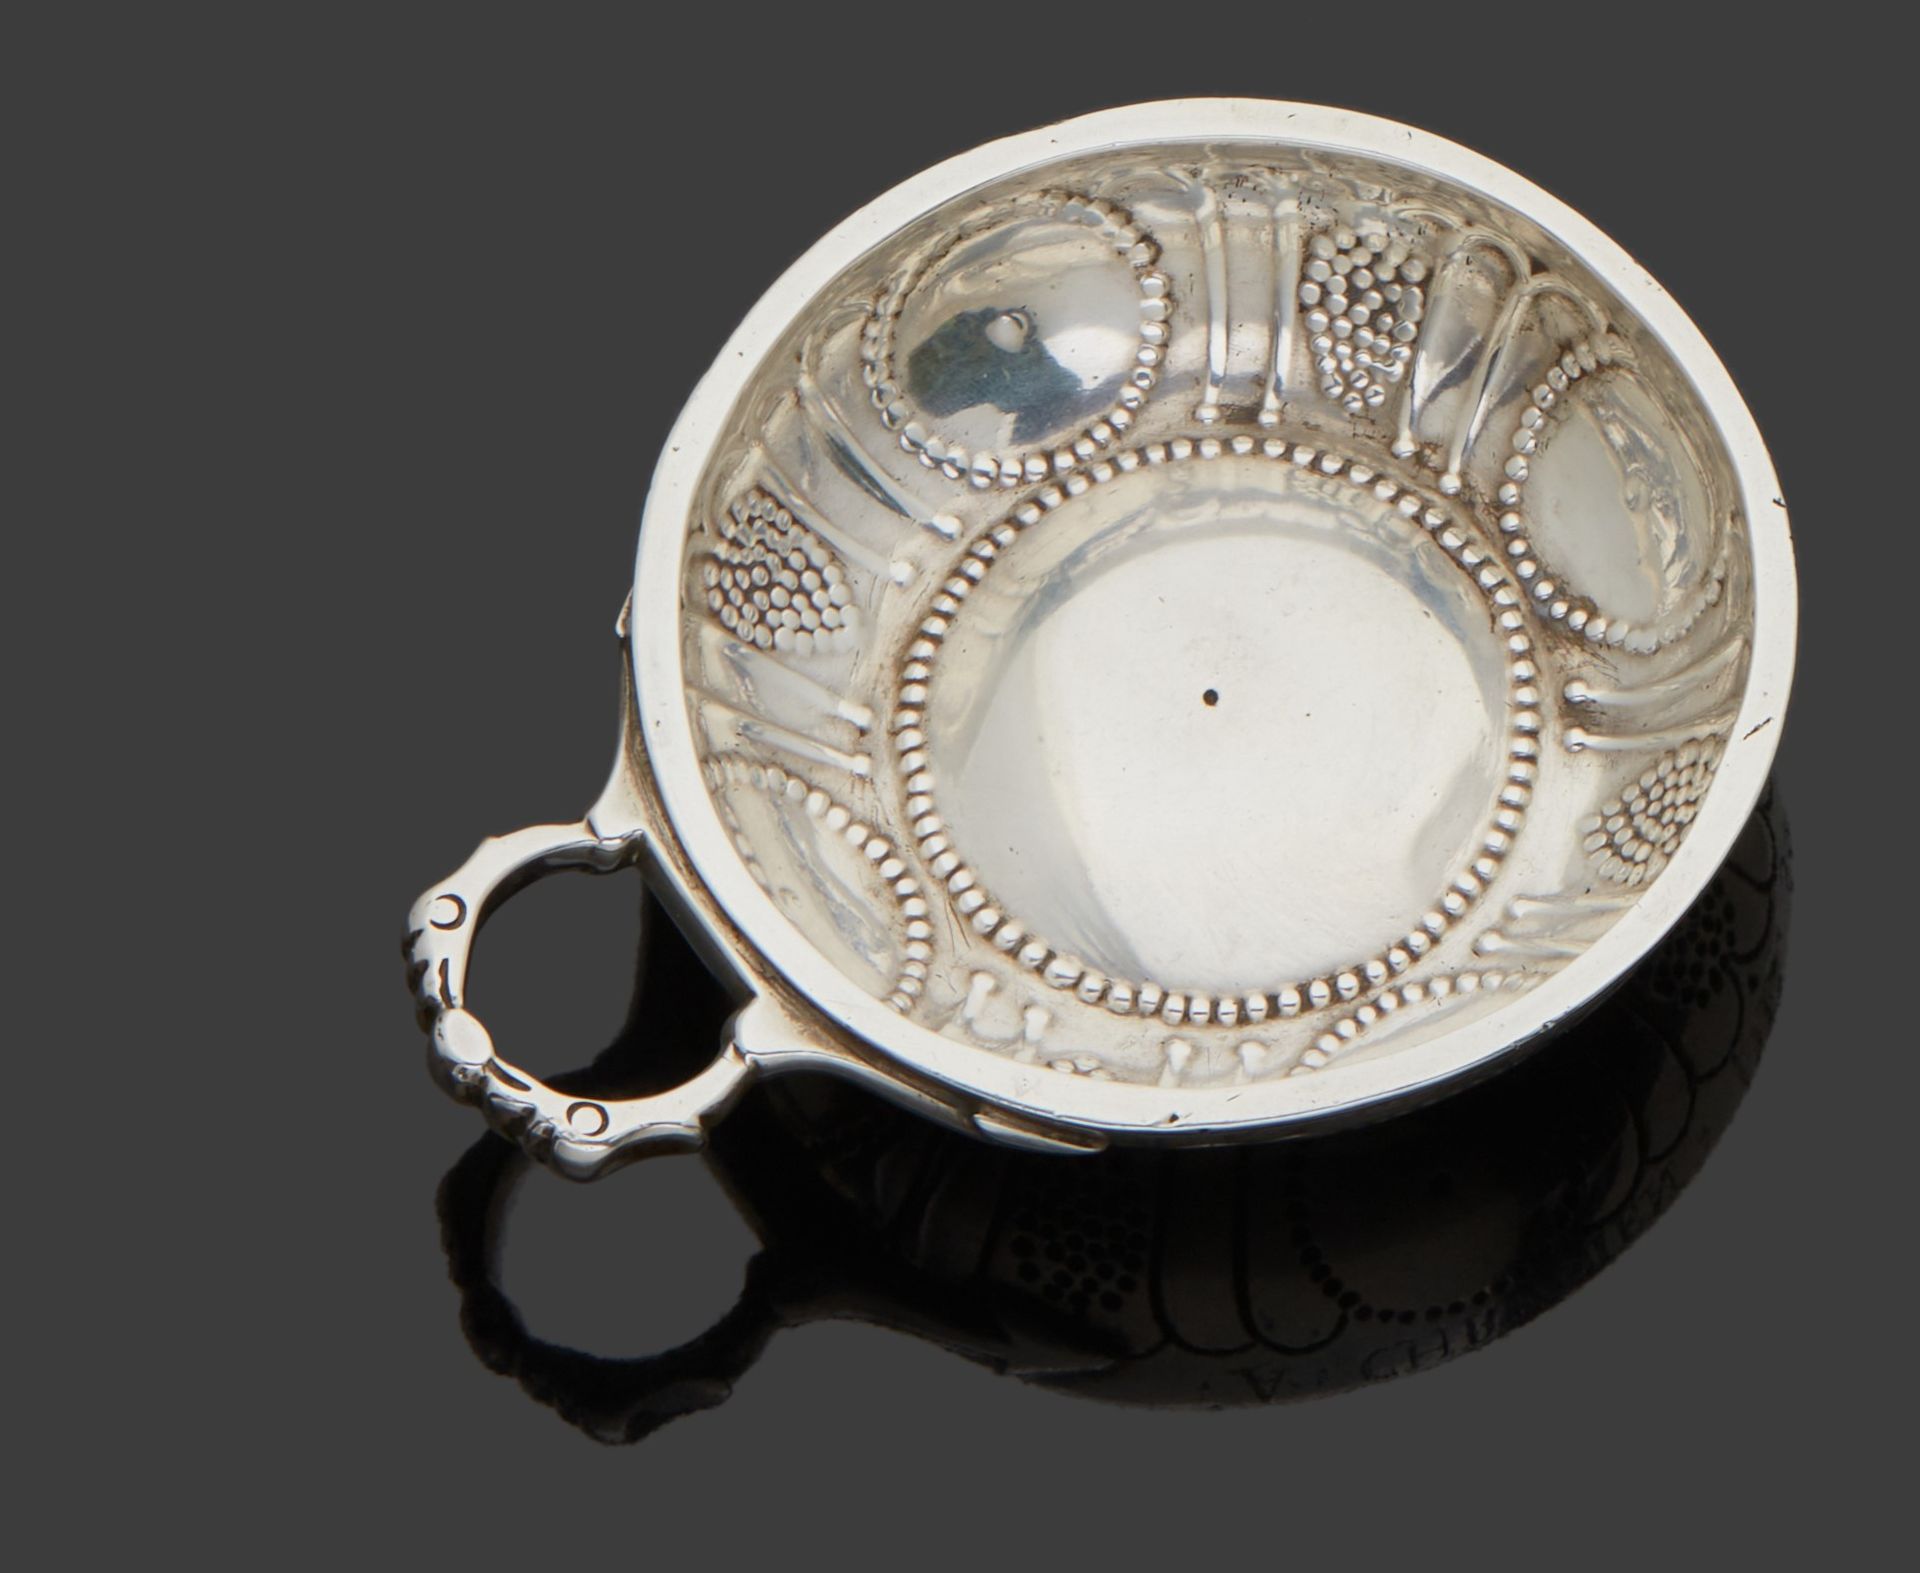 Null CHALON-SUR-SAÔNE 1768 - 1774
Silver wine cup on a rush, the handle with con&hellip;